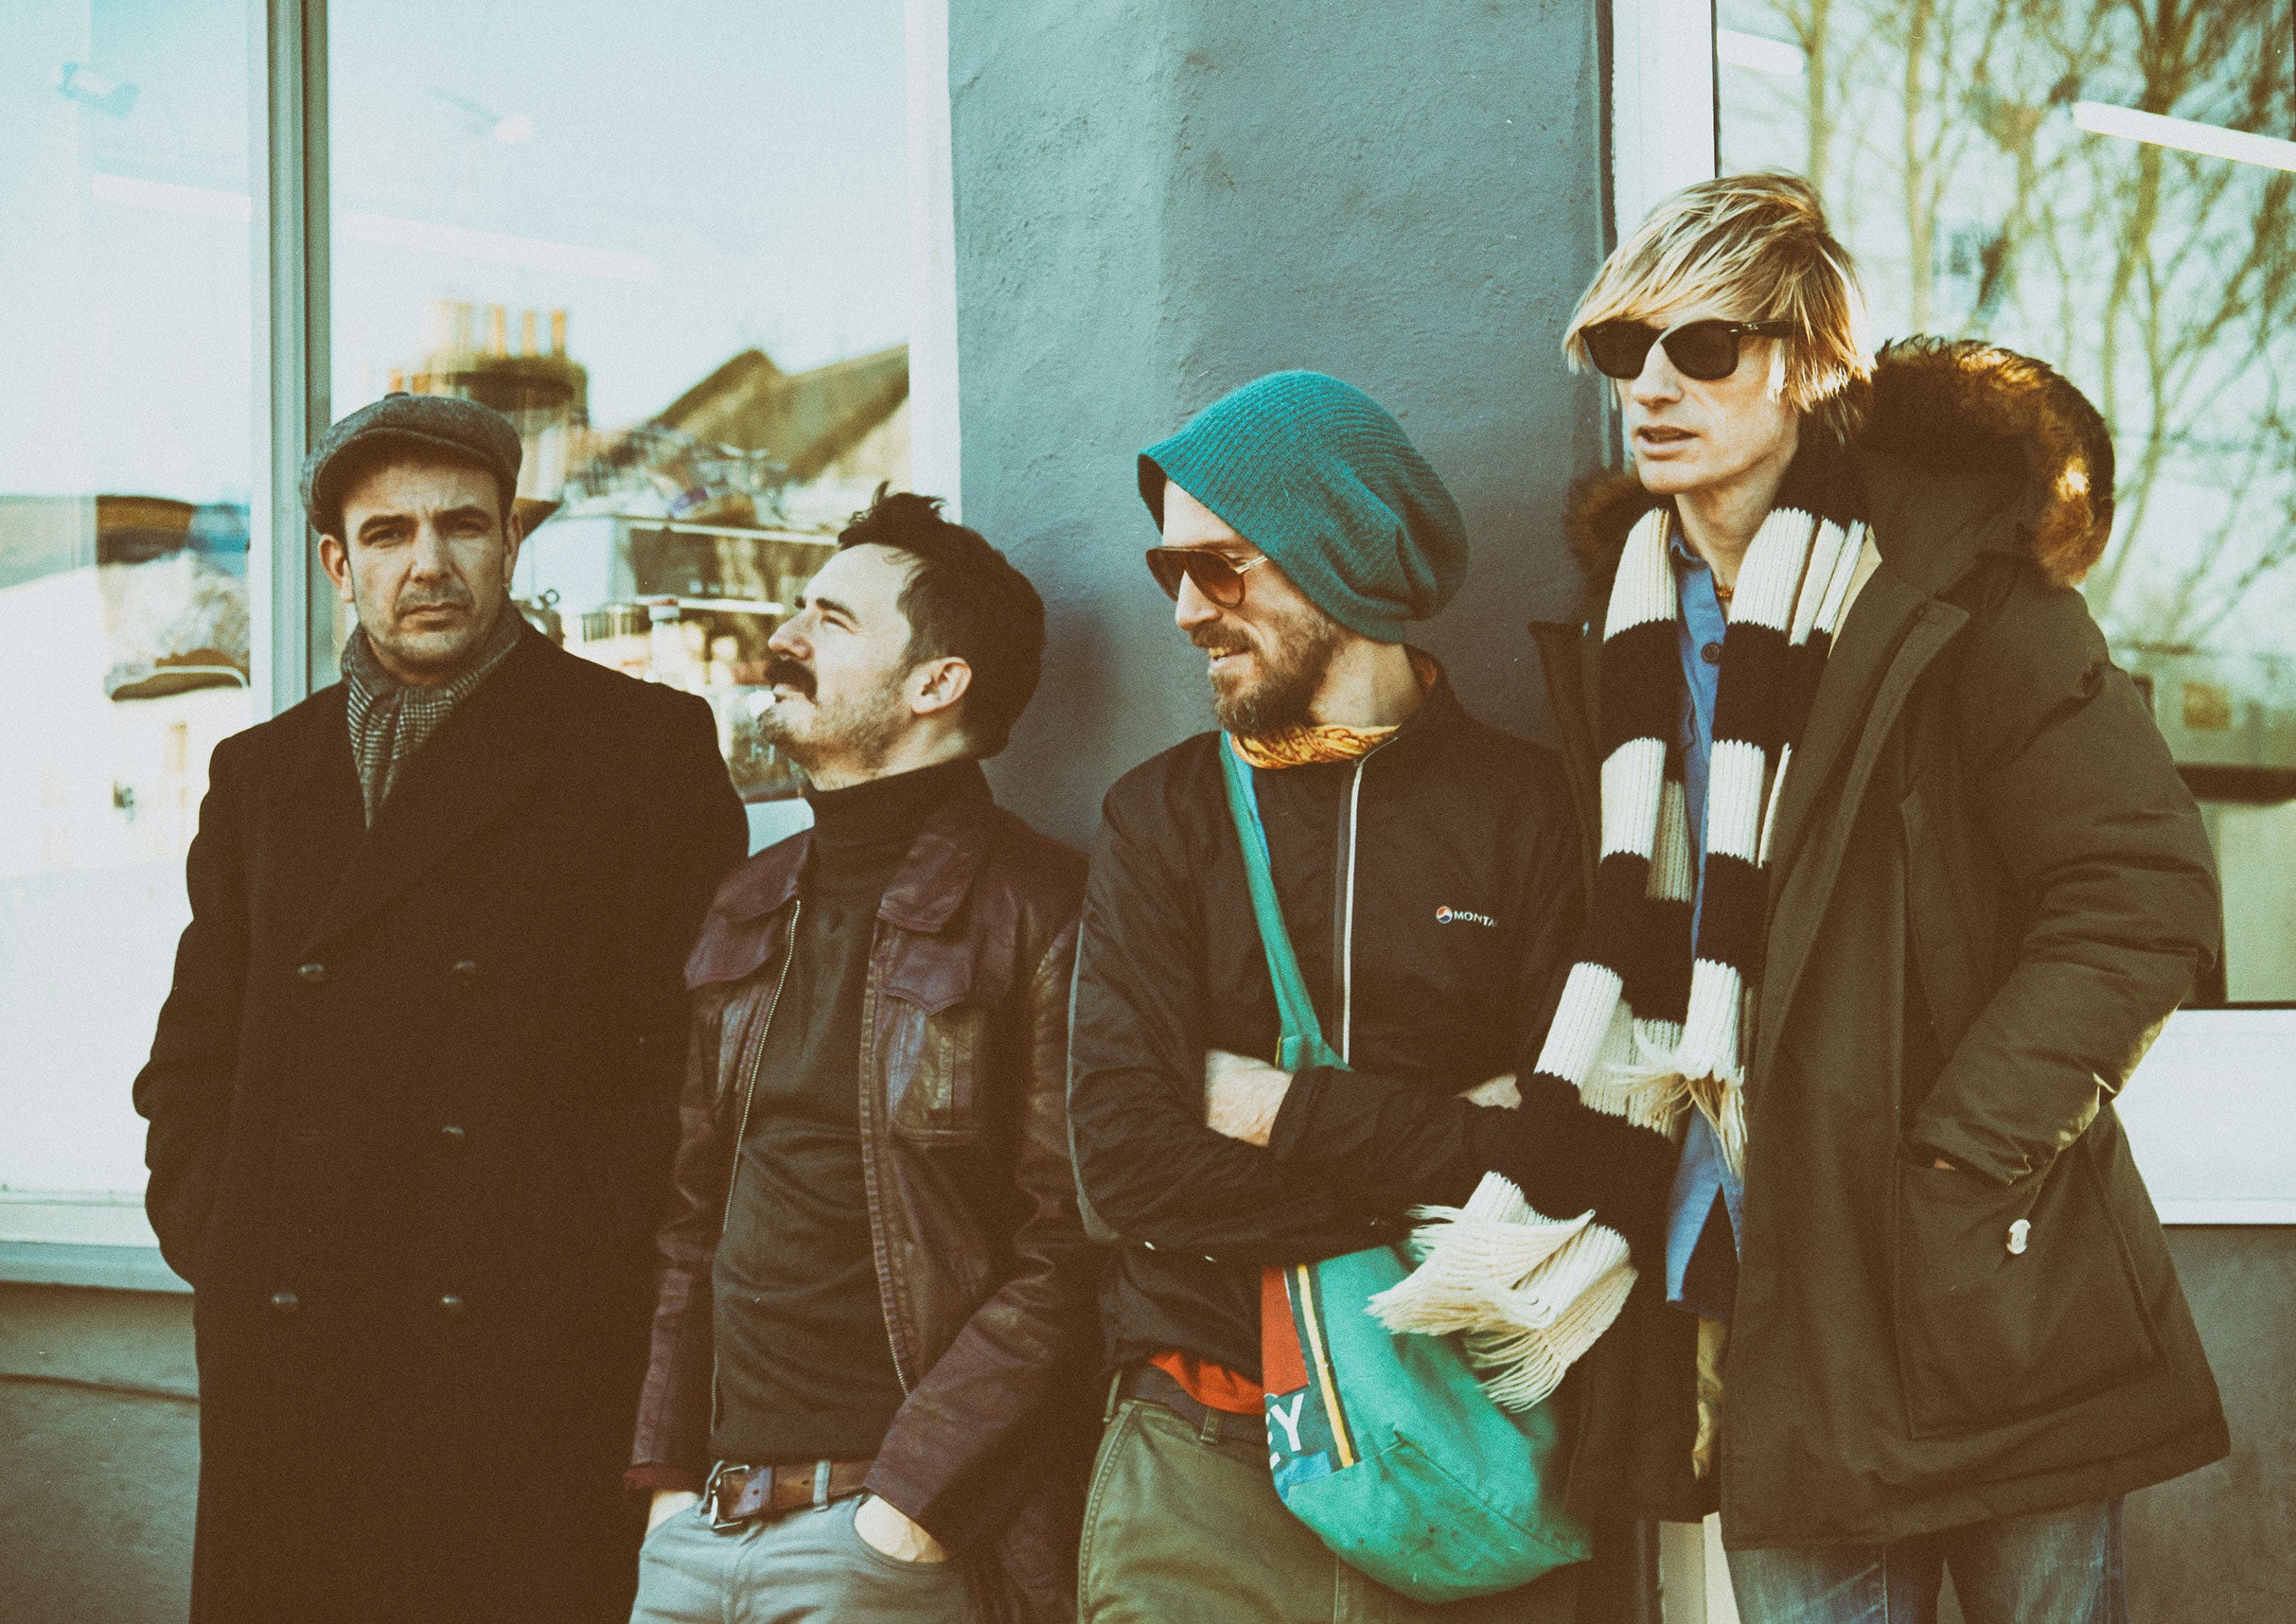 Kula Shaker pre-sale password for real tickets in Brooklyn